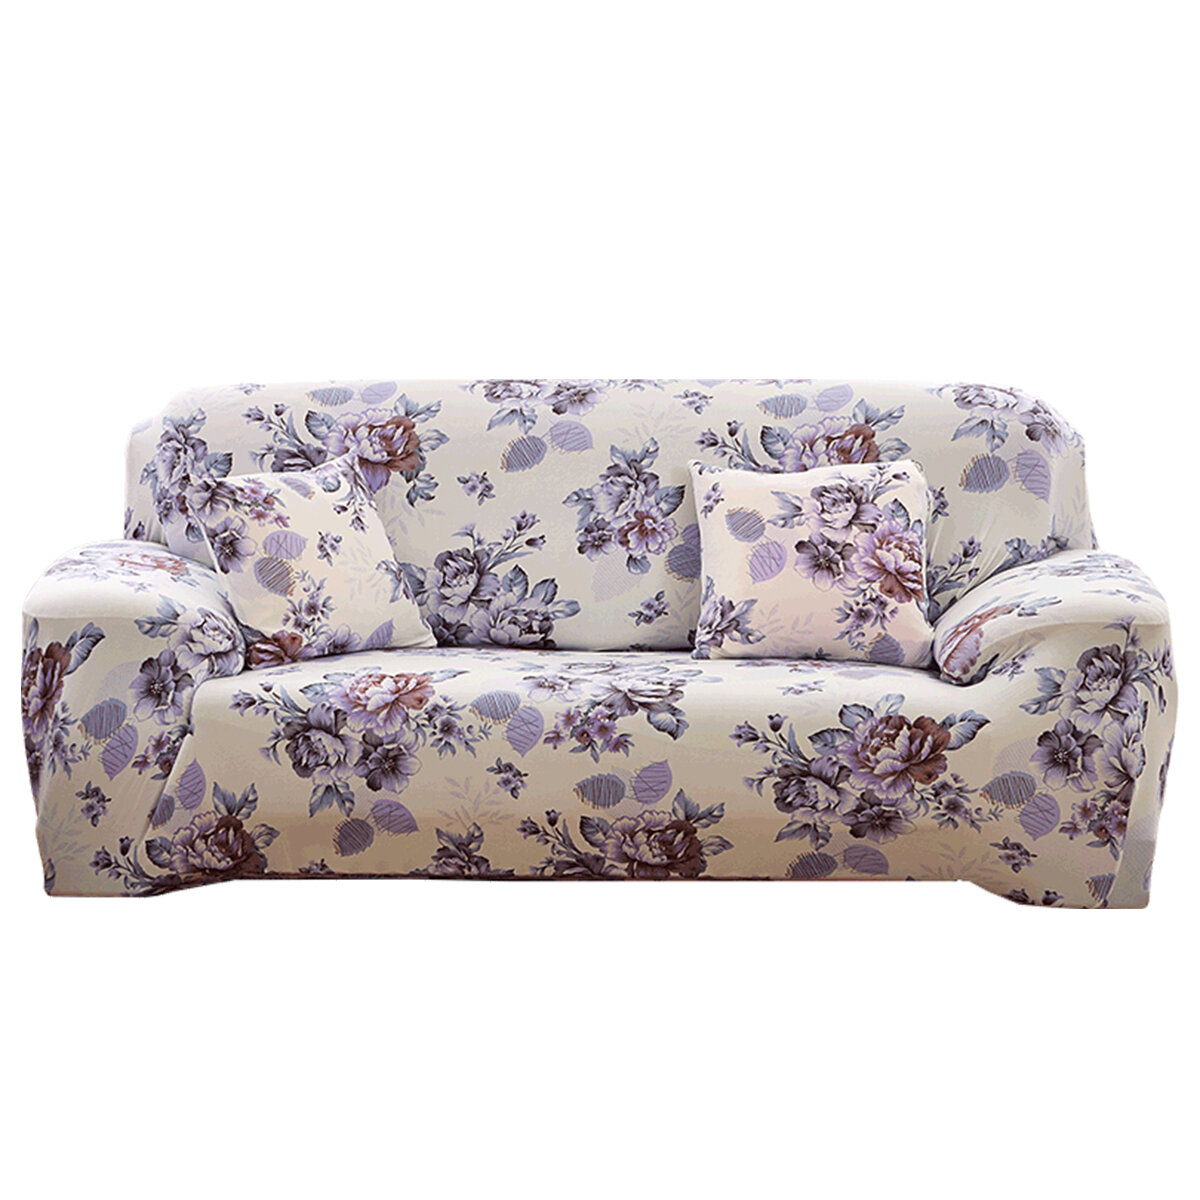 1/2/3/4 Seater Elastic Sofa Cover Pillowcase Chair Seat Protector Stretch Slipcover Home Office Furniture Accessories De